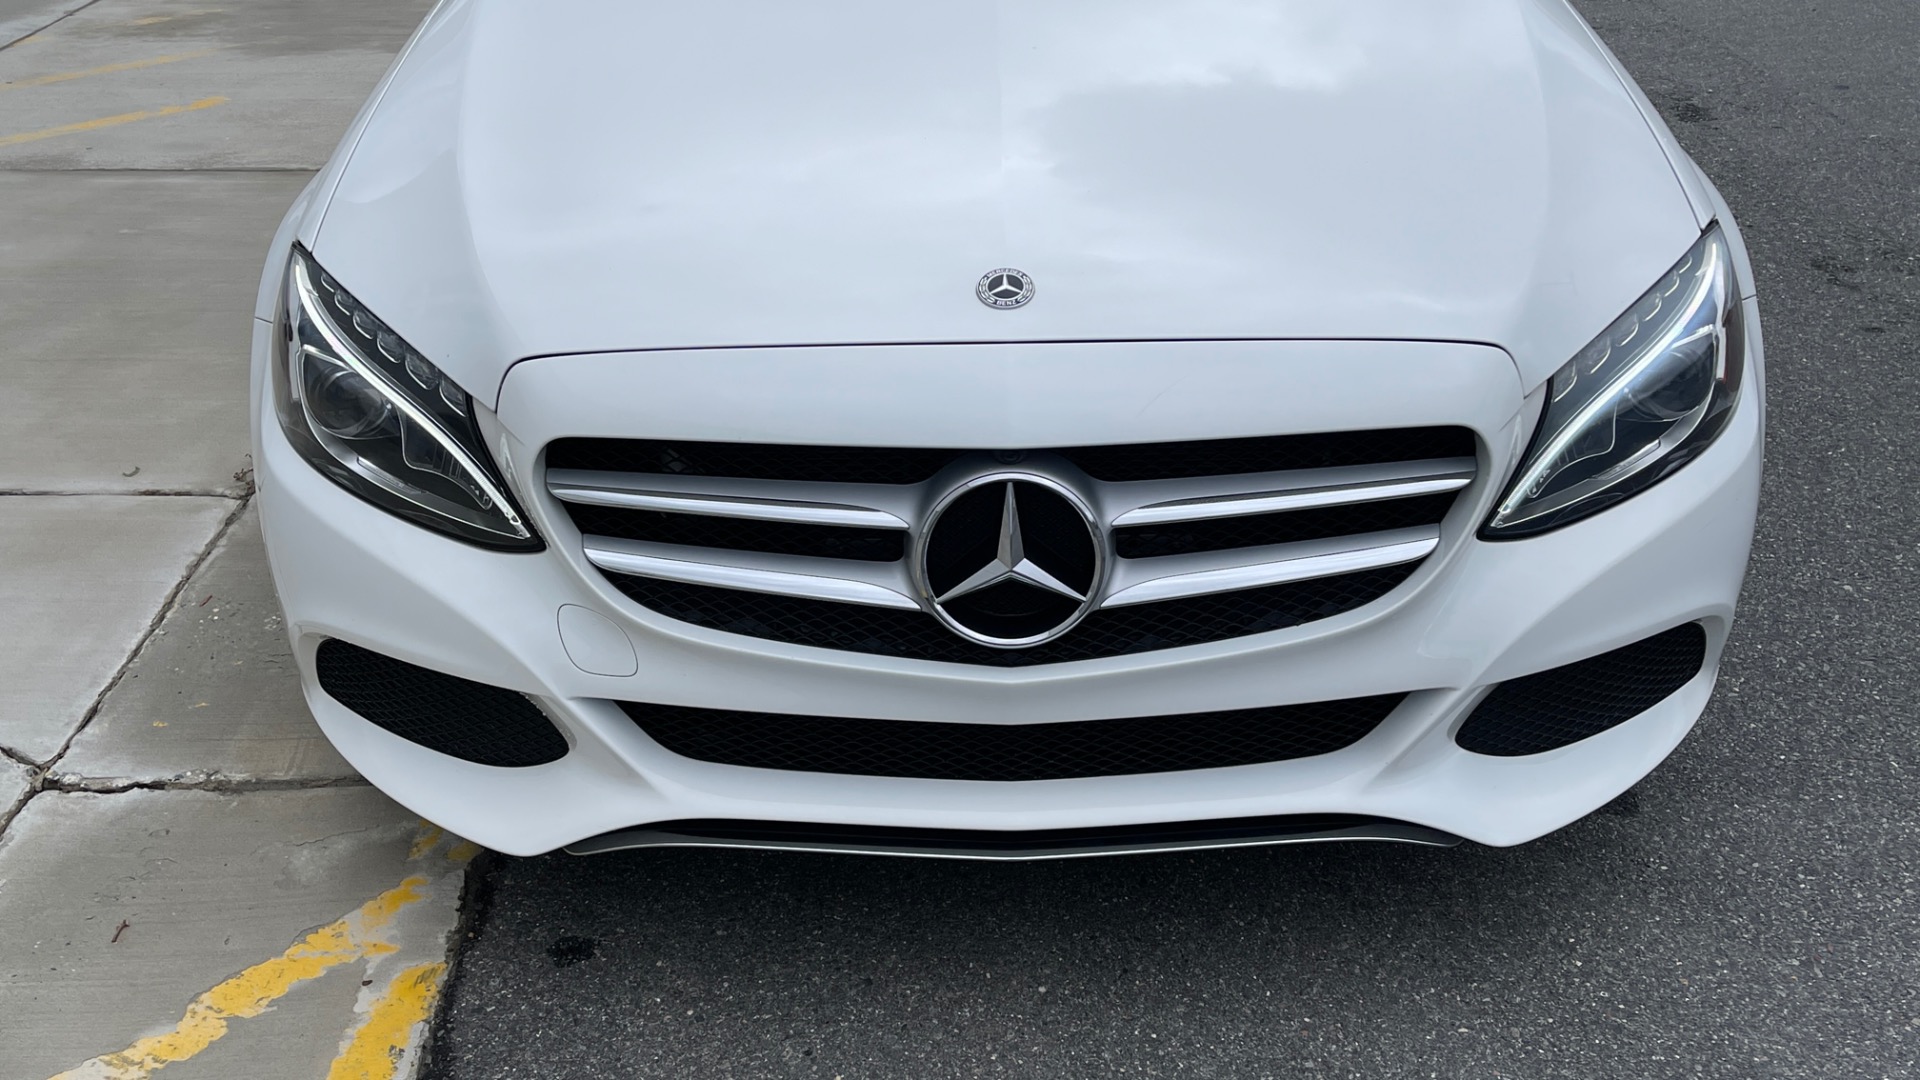 Used 2018 Mercedes-Benz C-Class C 300 / PREMIUM PACKAGE / 18IN WHEELS / HEATED FRONT SEATS / LED HEADLIGHTS for sale Sold at Formula Imports in Charlotte NC 28227 9